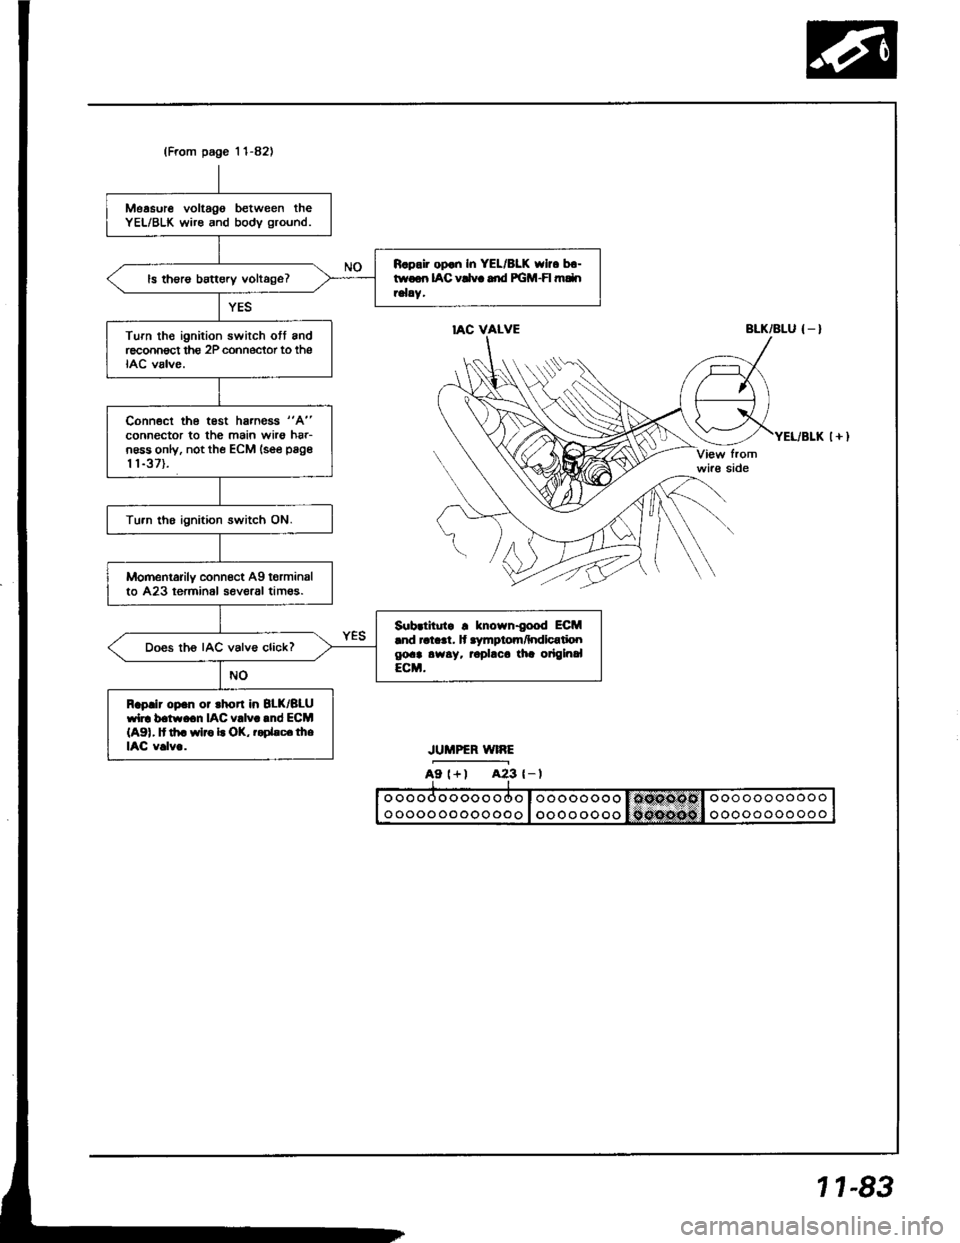 HONDA INTEGRA 1994 4.G Workshop Manual (From page l 1-82)
Measure voltago between theYEL/BLK wire and bodv ground.
R.pair op.n In YEL/8LK who b.-twoon IAC vCvc dd PGM-FI mdnrelay.ls th€rs battery voltage?
Turn th€ ignition swirch ott 